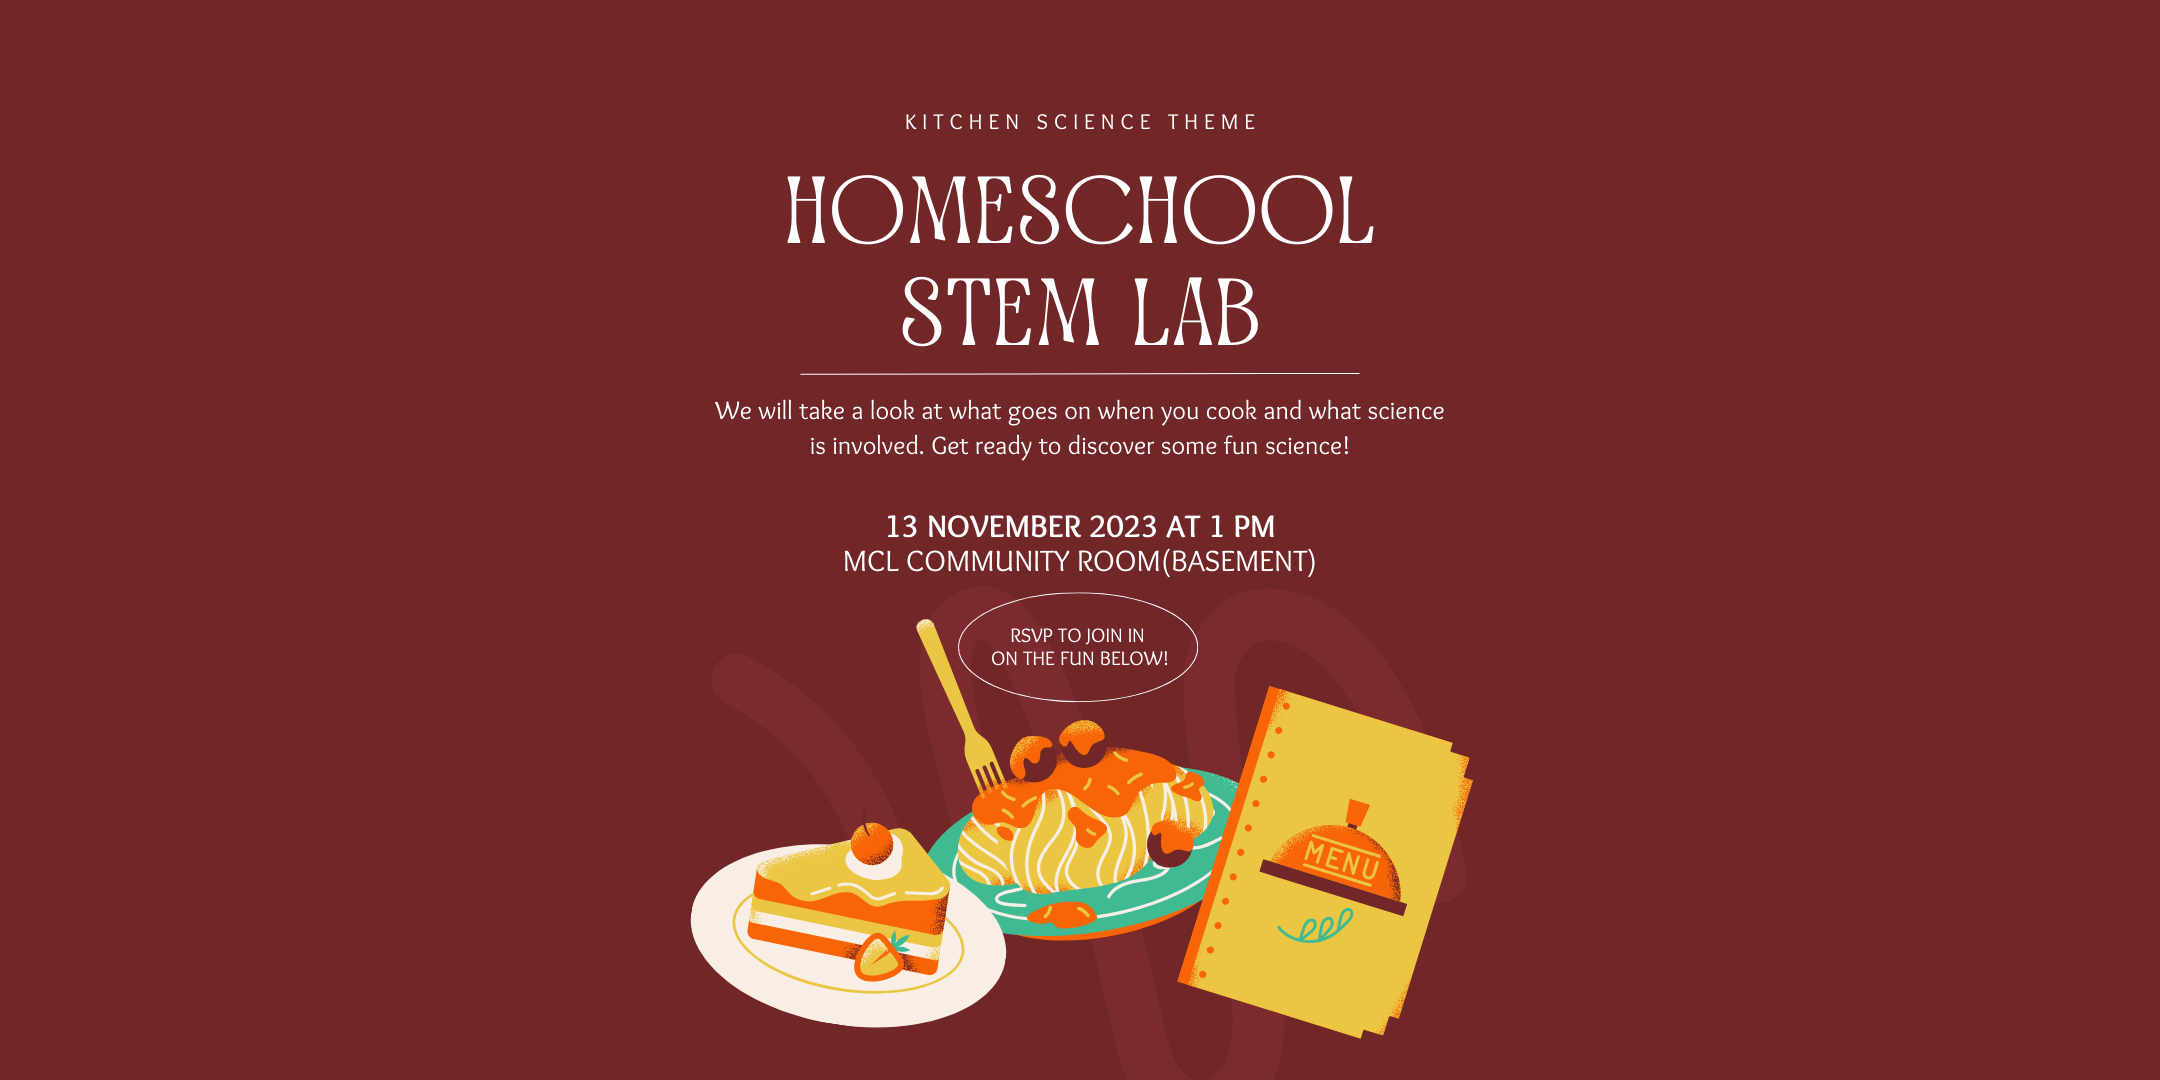 Kitchen Science Lab Homeschool STEM Lab November 13th at 1pm in the Community Room(basement). Explore the cool world of science you've never thought about... in the kitchen!